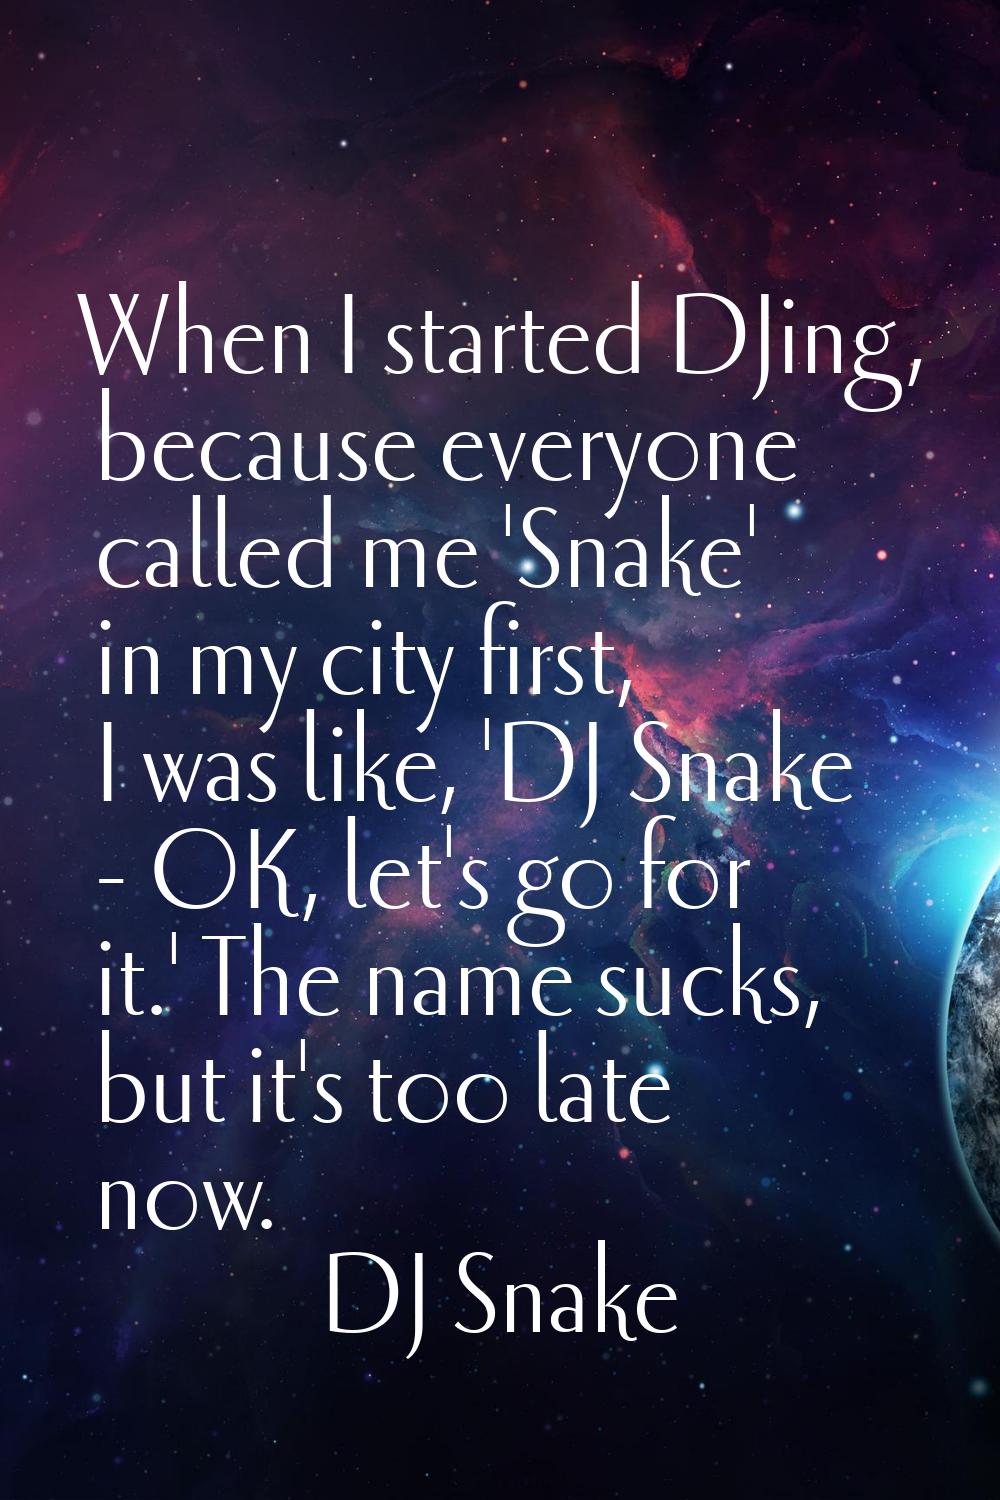 When I started DJing, because everyone called me 'Snake' in my city first, I was like, 'DJ Snake - 